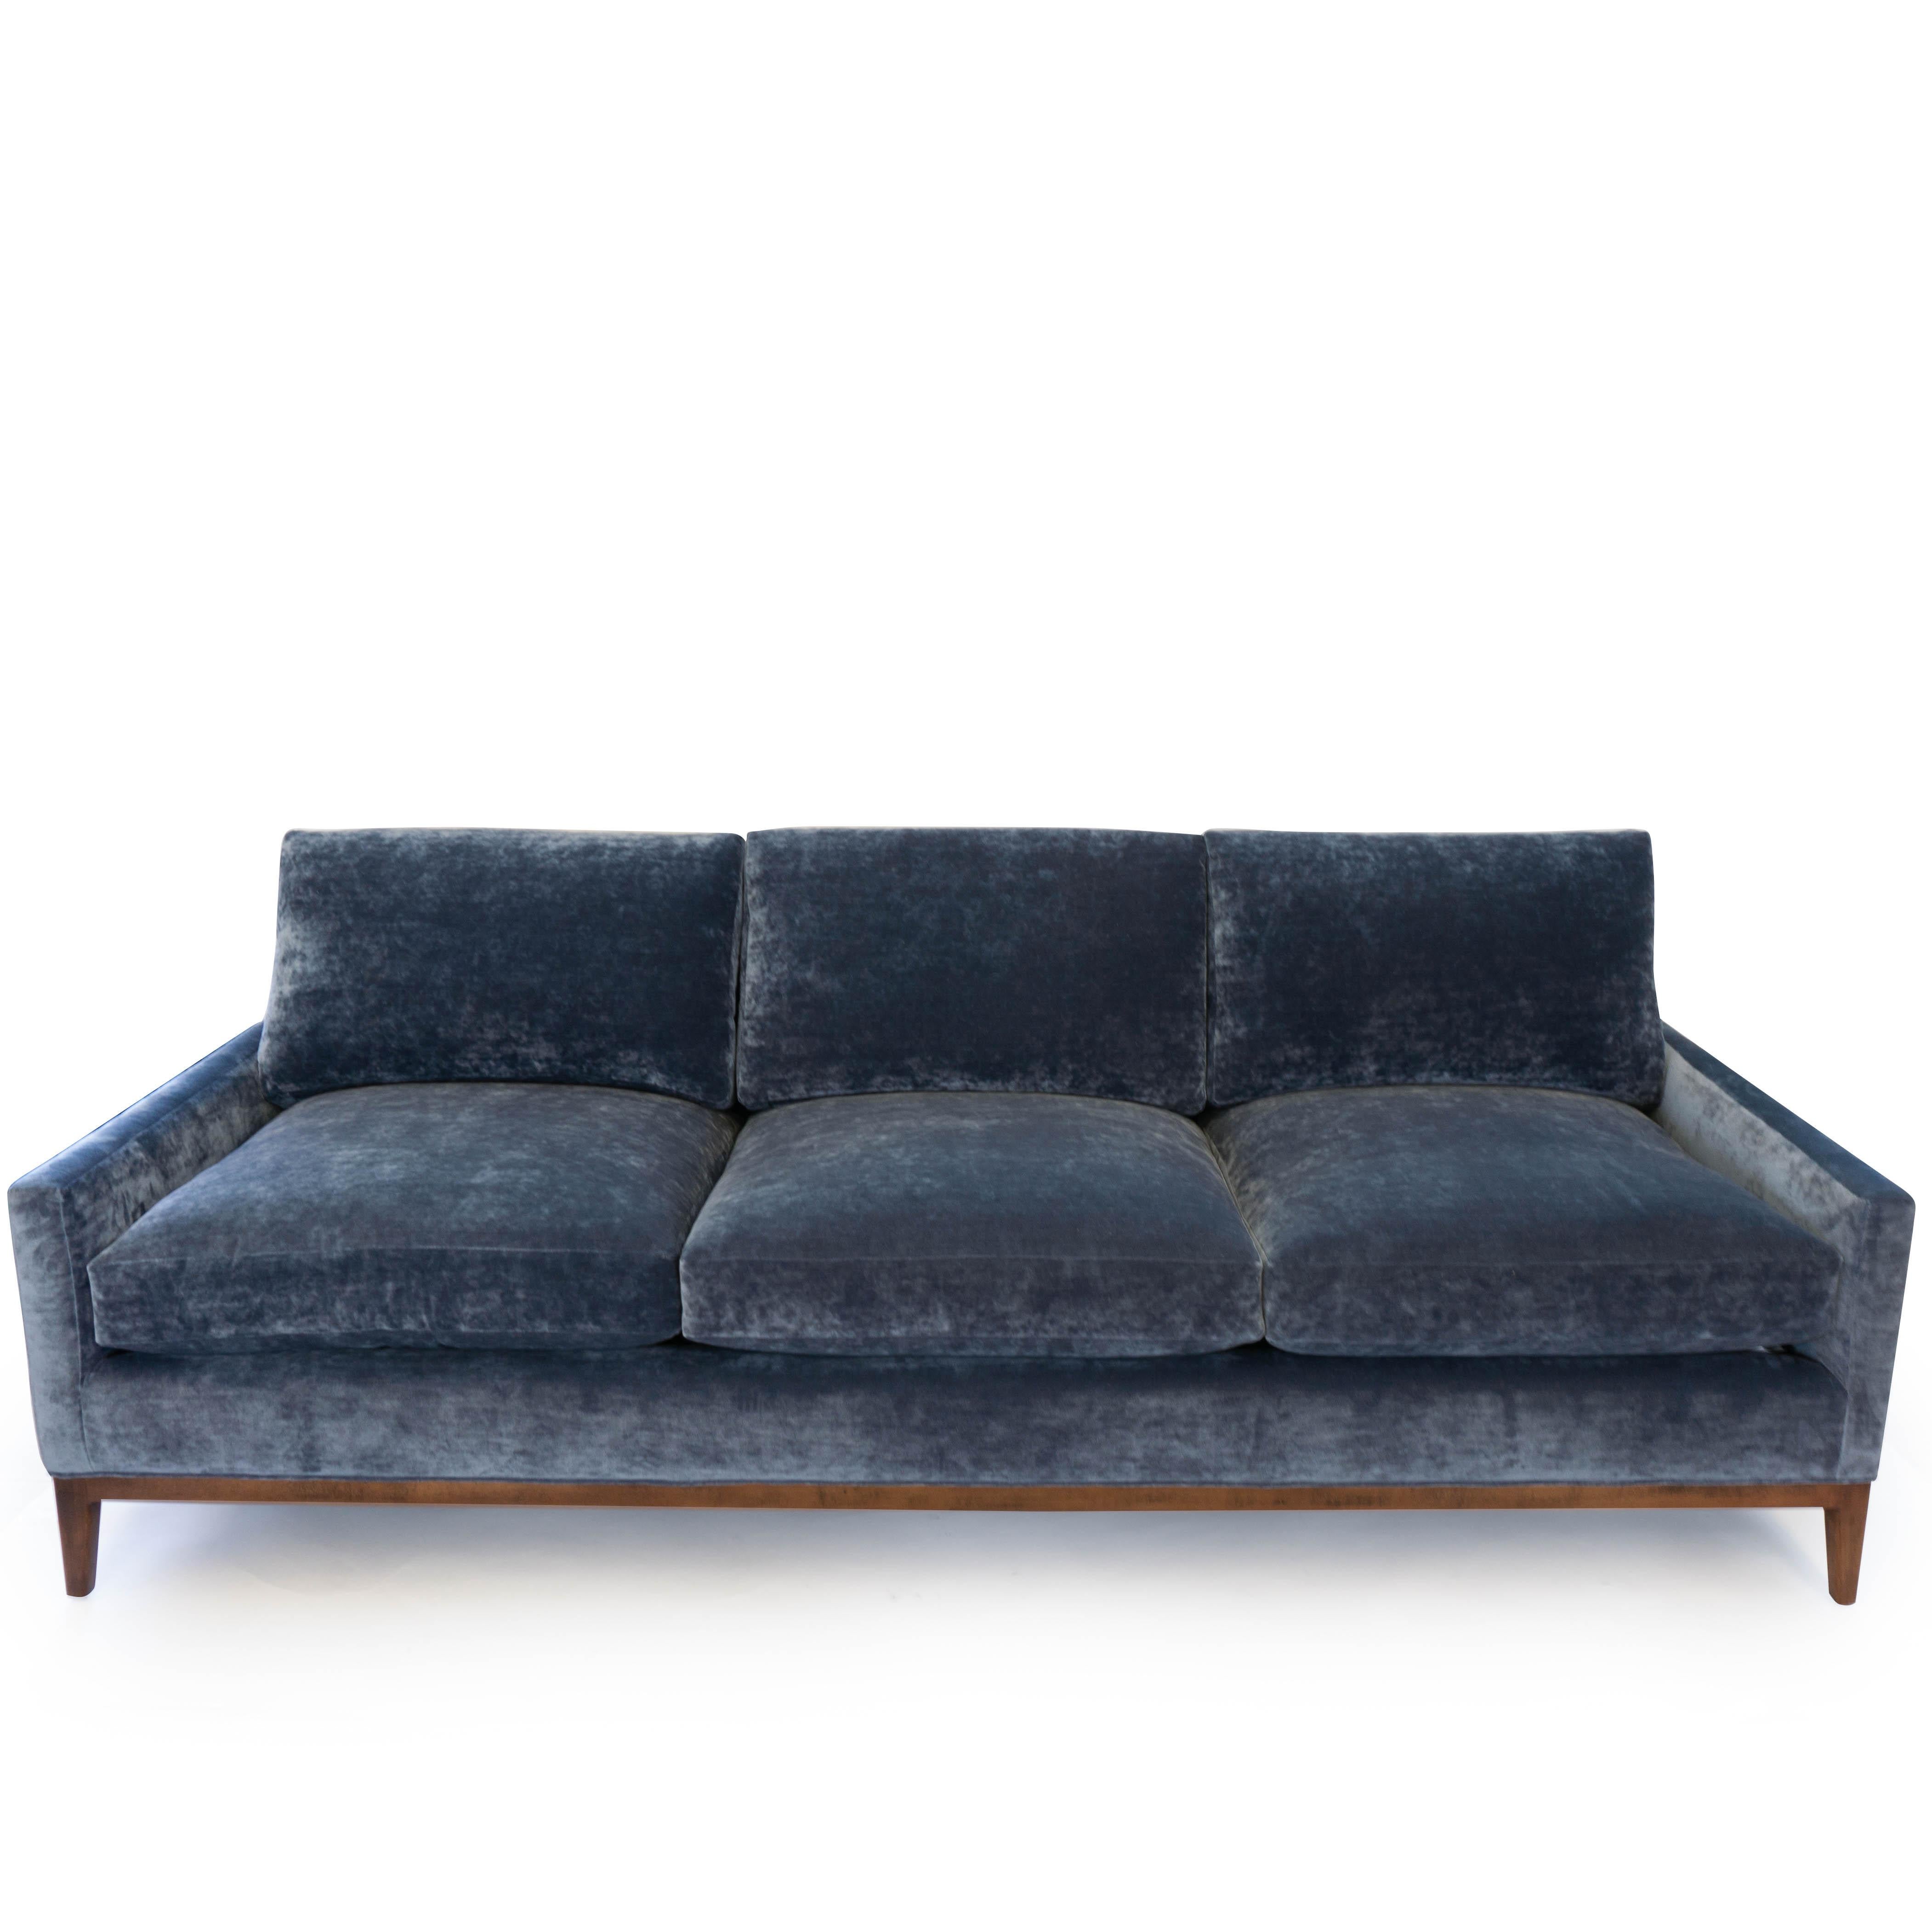 This Mid-Century Modern inspired sofa (known as 